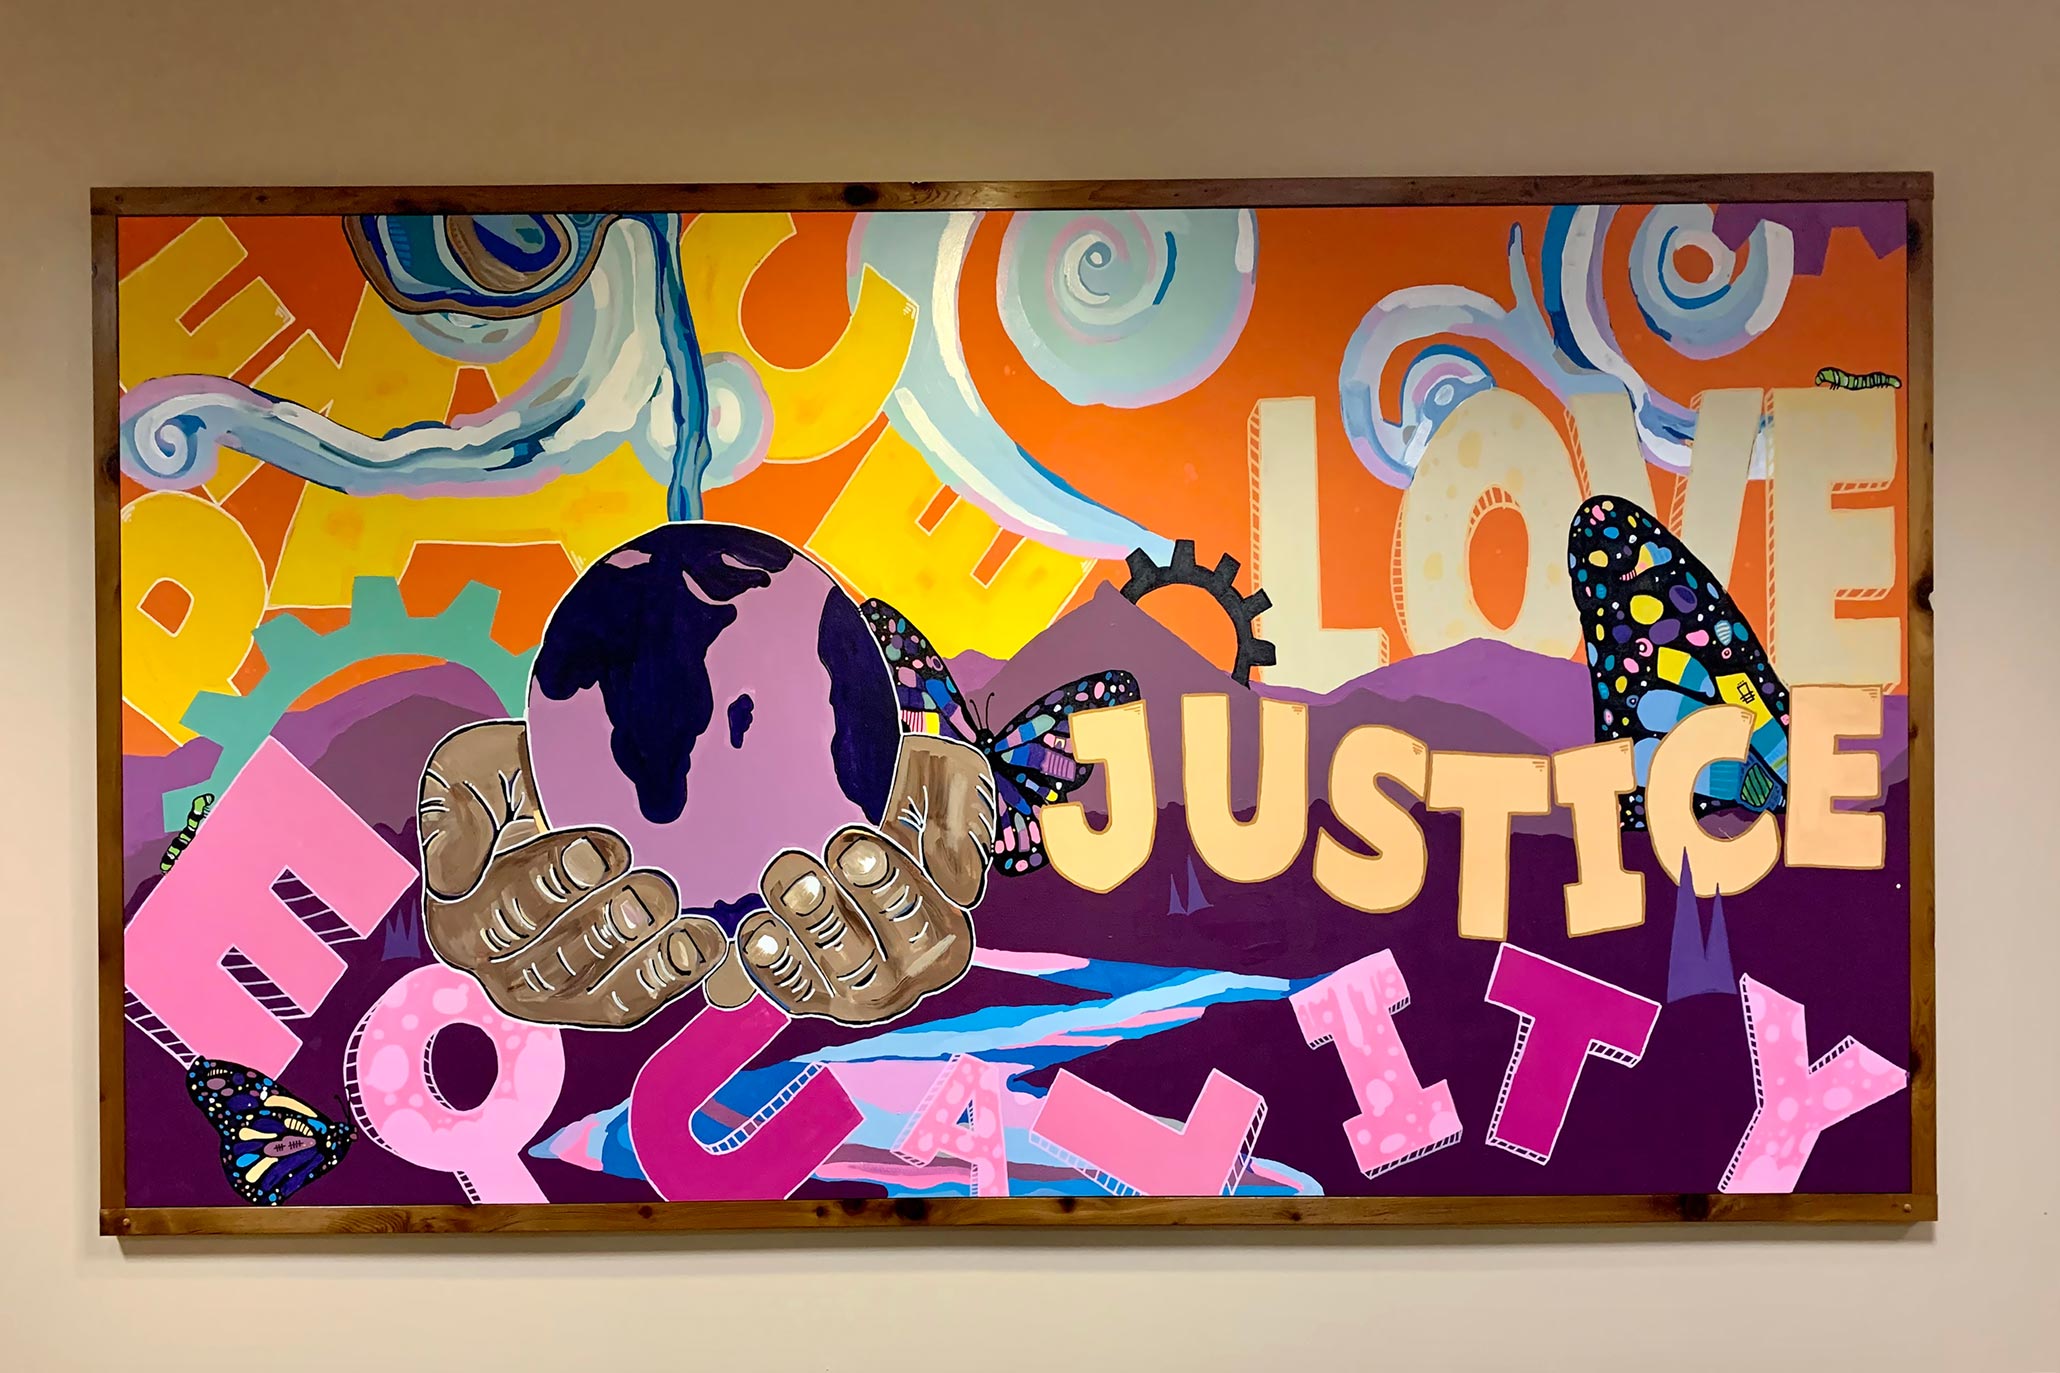 Painting by Daren Hill with emphasis on equality, justice, and love.